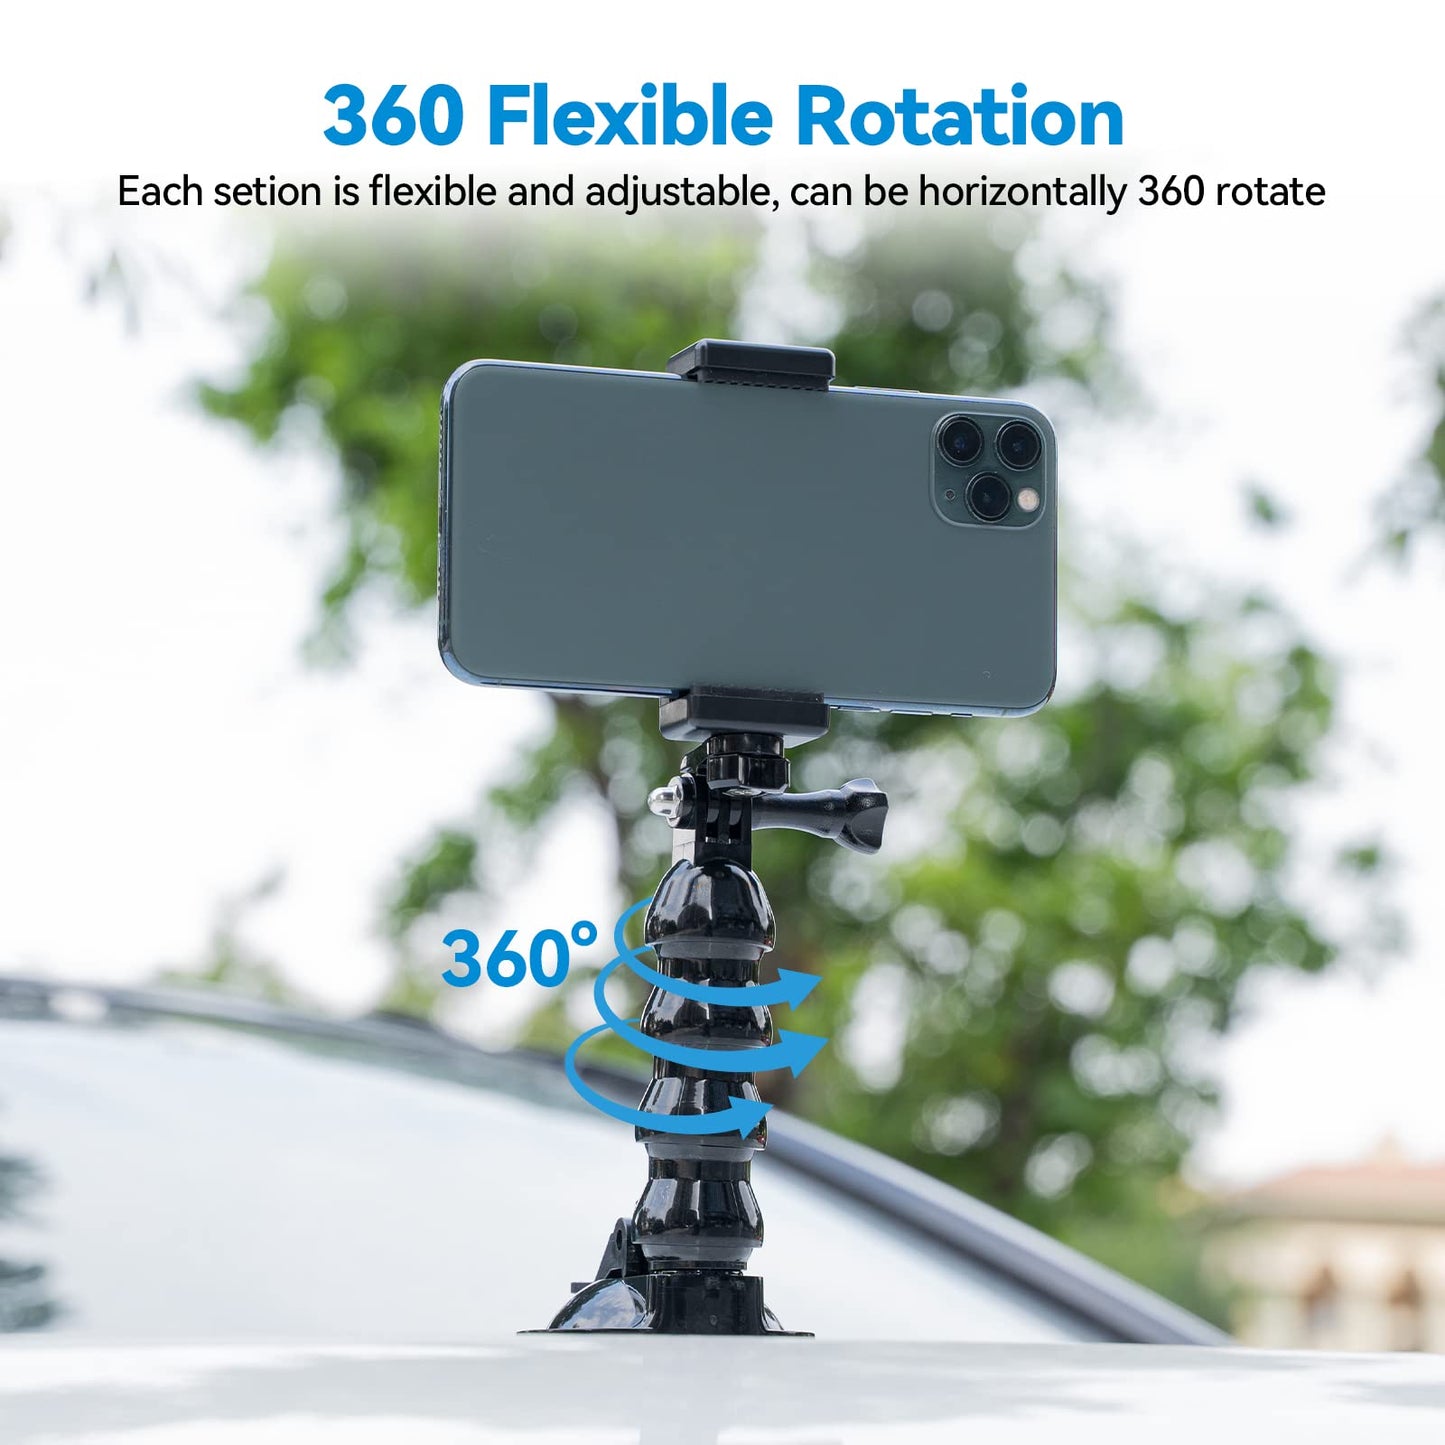 TELESIN Flexible Suction Car Mount for GoPro, iPhone, Android - 75mm Diameter